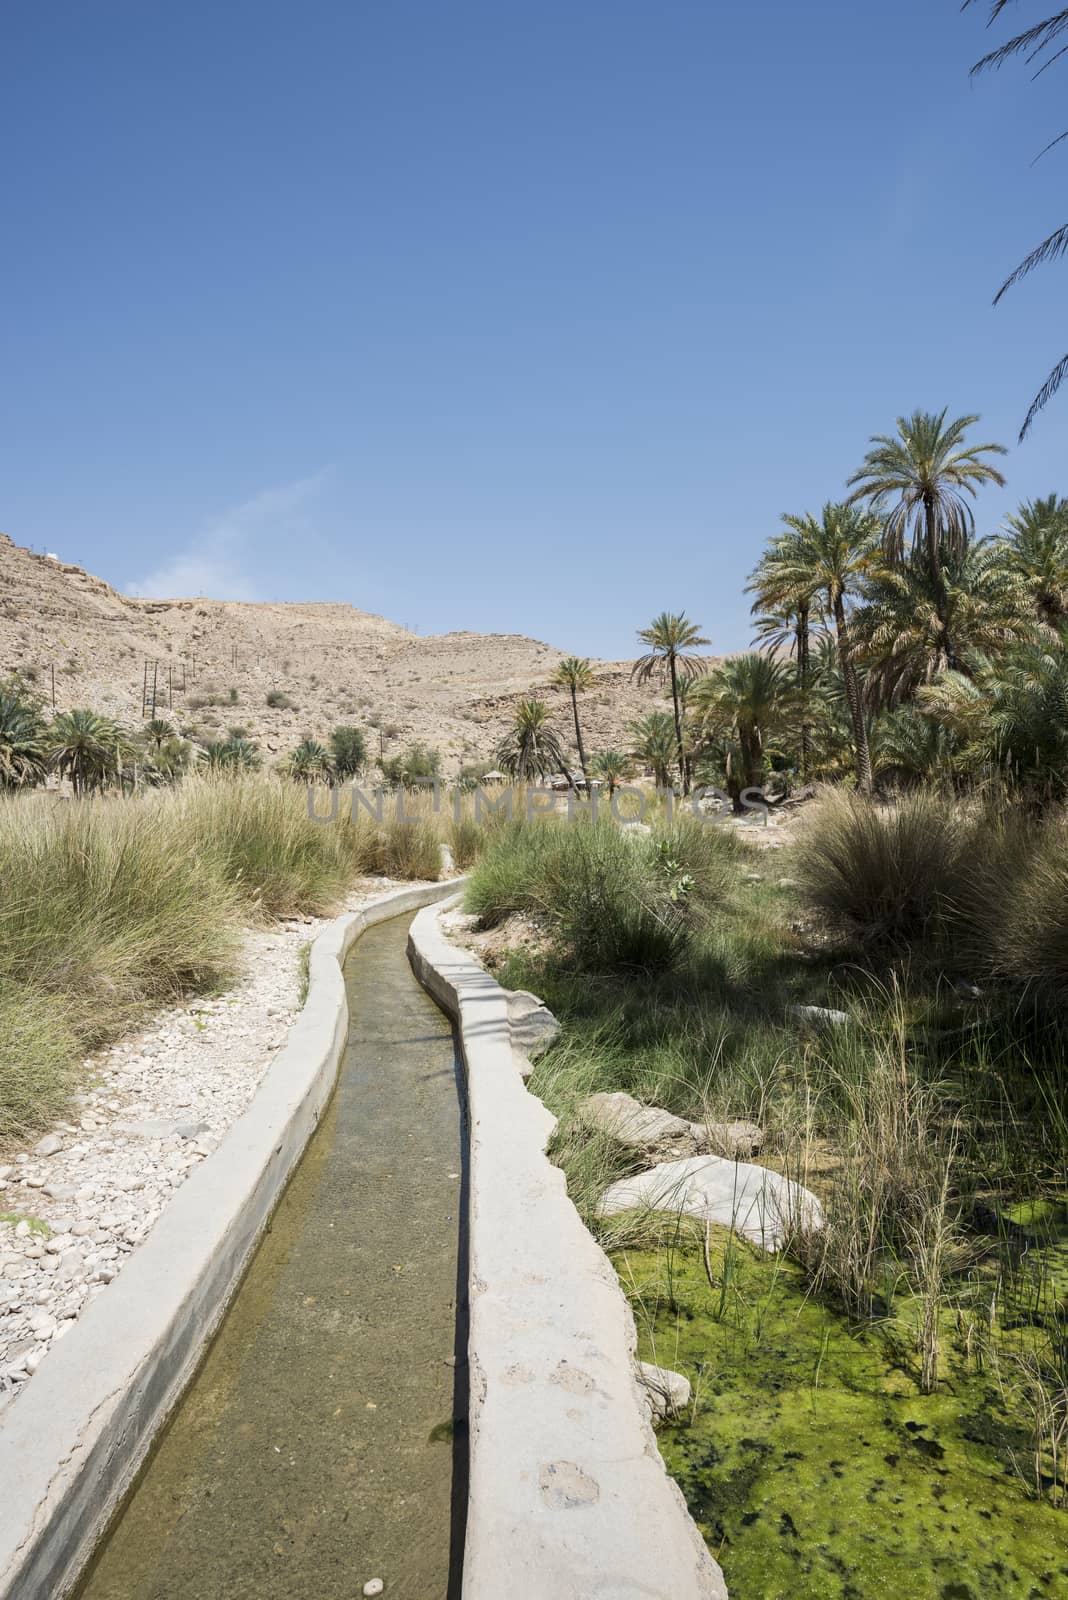 Palm trees and water canal in a Wadi, Oman by GABIS